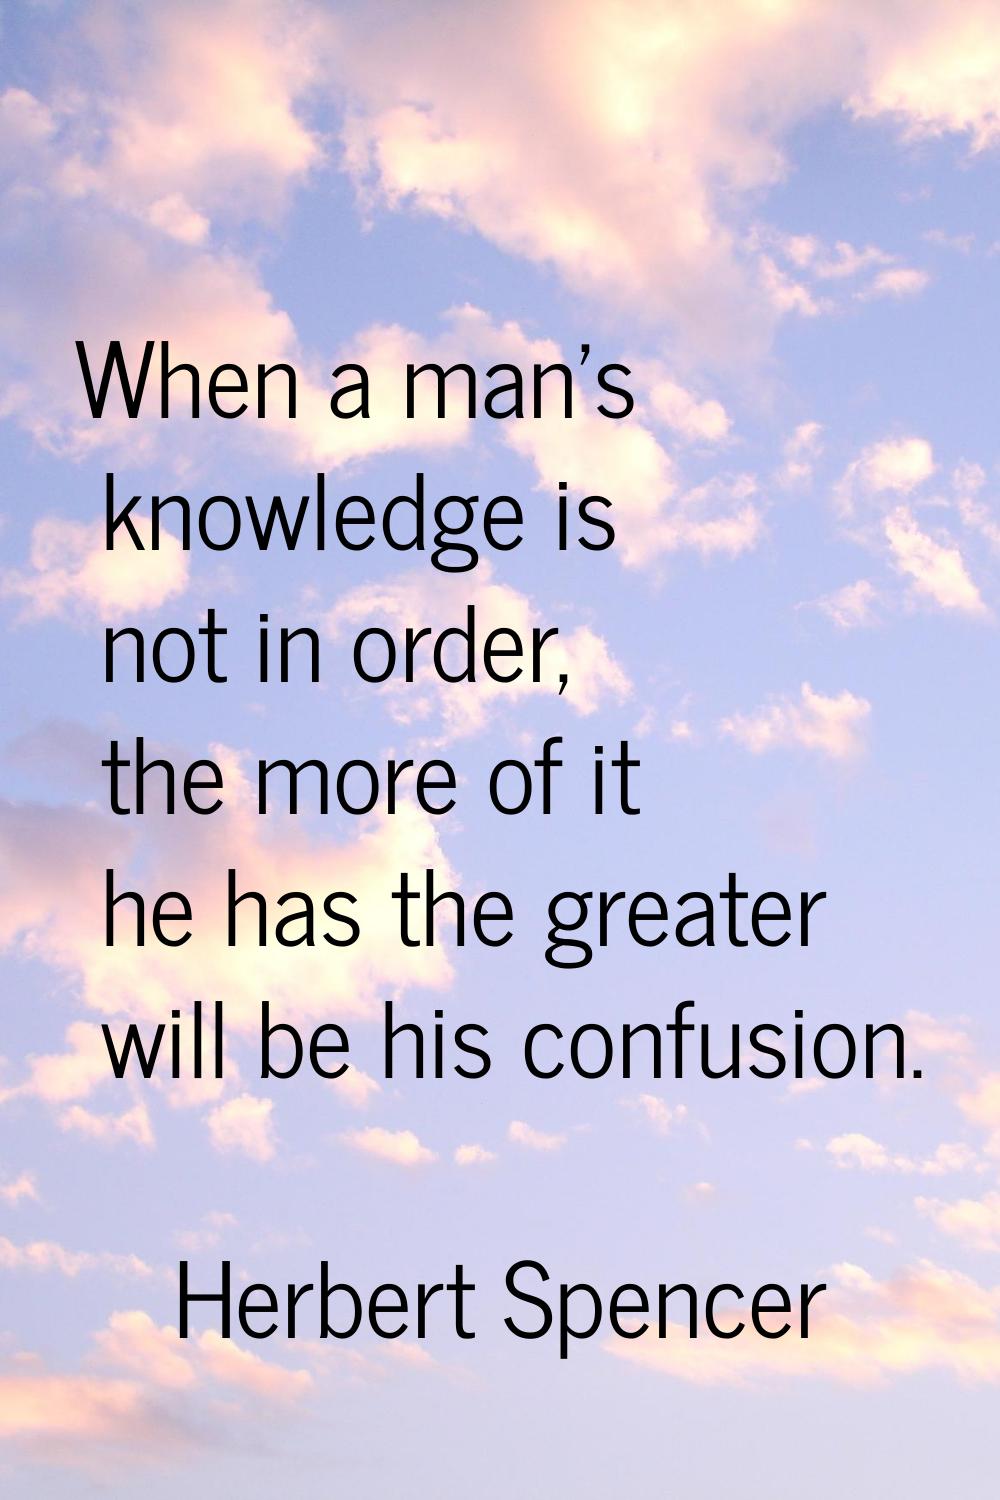 When a man's knowledge is not in order, the more of it he has the greater will be his confusion.